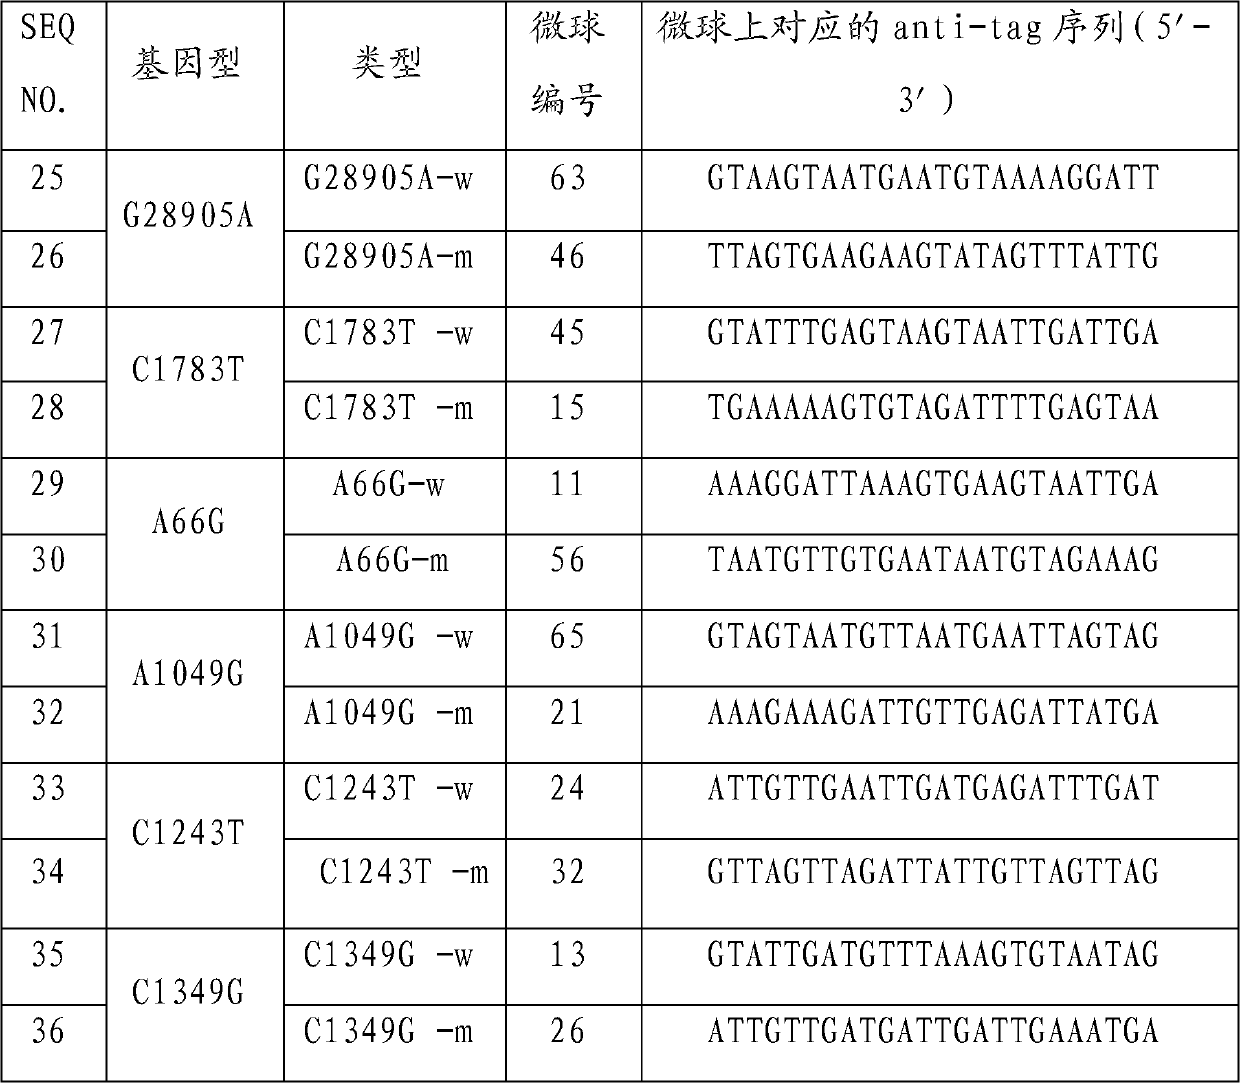 MTRR (5-methyltetrahydrofolate-homocysteine methyltransferase reductase) gene mutation detection specific primers and liquid chip